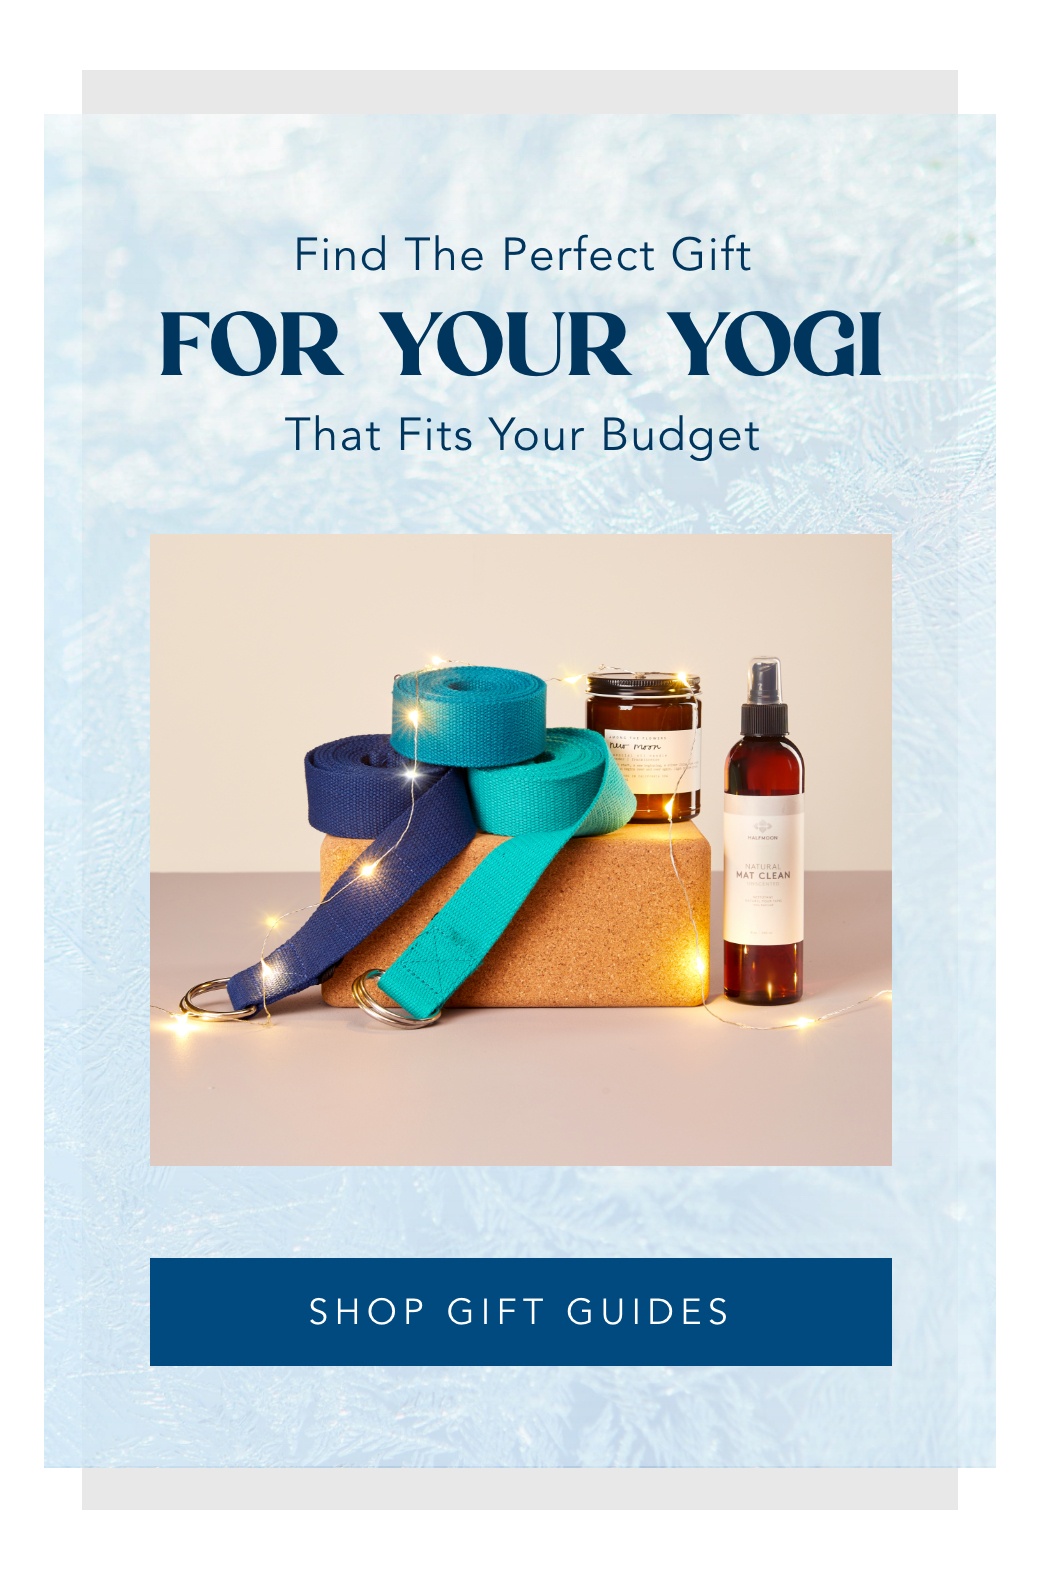 Find the perfect gift for your yogi that fits your budget.